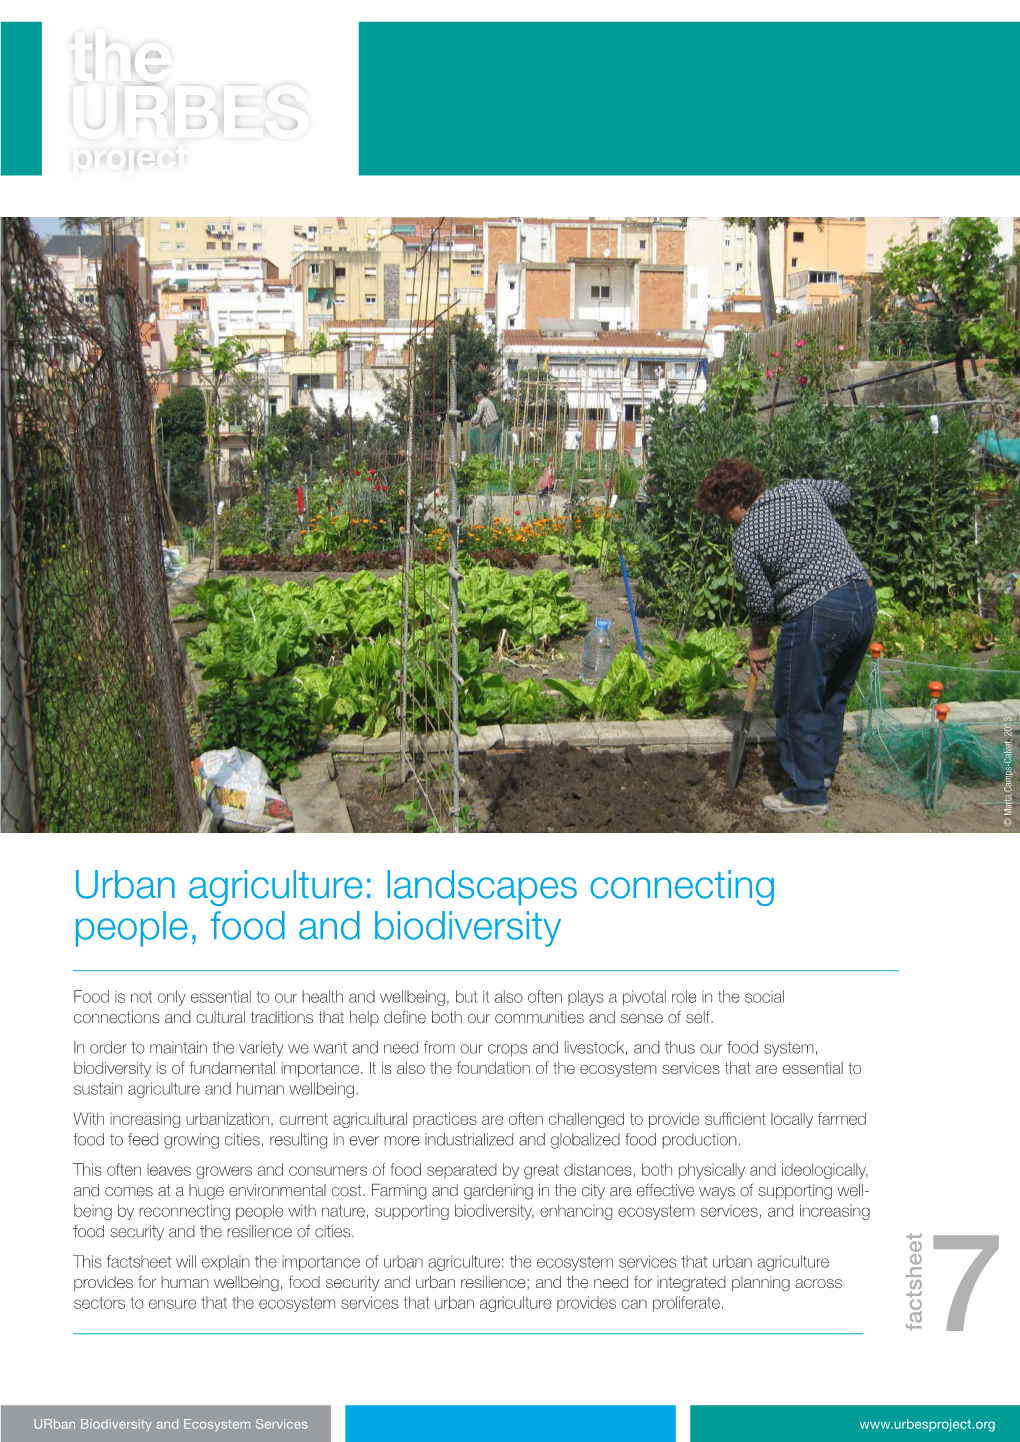 Urban Agriculture: Landscapes Connecting People, Food and Biodiversity